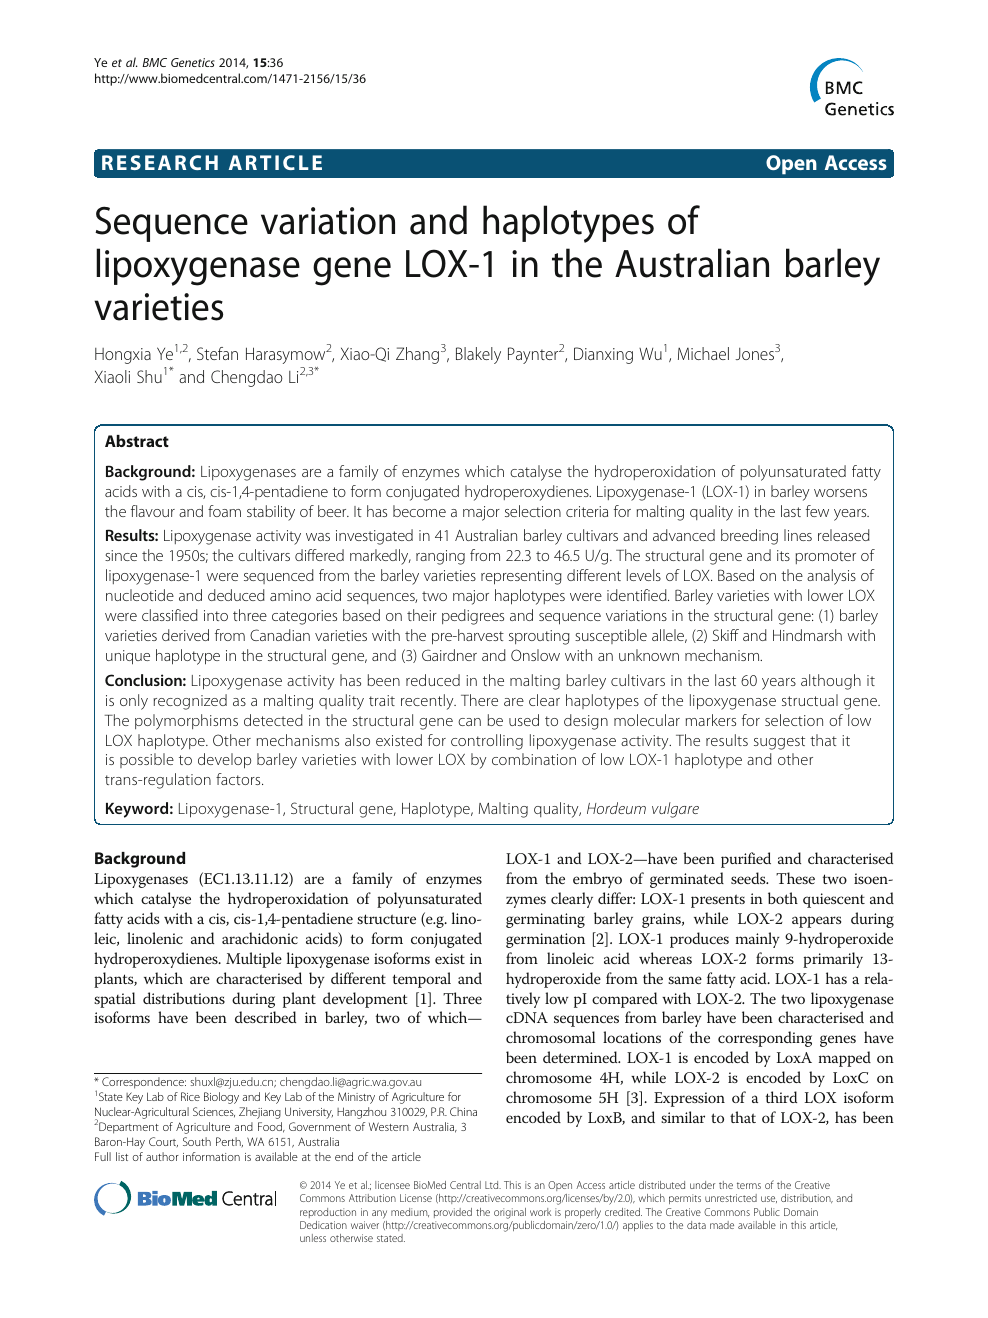 Sequence Variation And Haplotypes Of Lipoxygenase Gene Lox 1 In The Australian Barley Varieties Topic Of Research Paper In Biological Sciences Download Scholarly Article Pdf And Read For Free On Cyberleninka Open